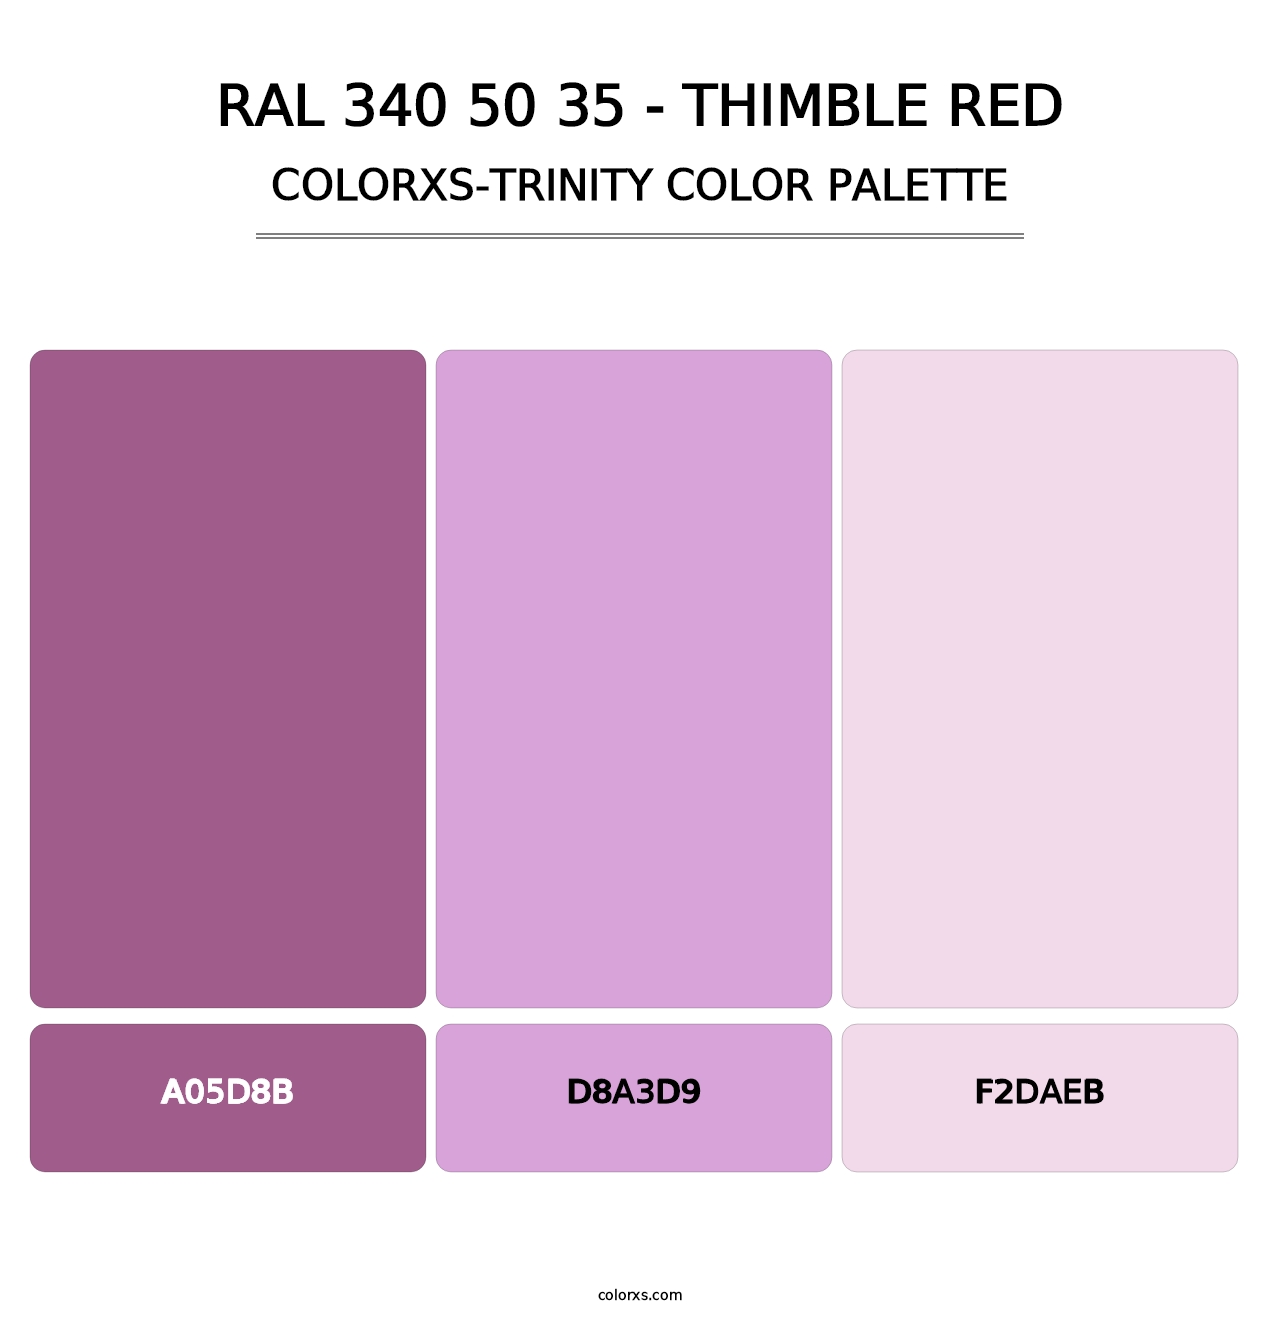 RAL 340 50 35 - Thimble Red - Colorxs Trinity Palette